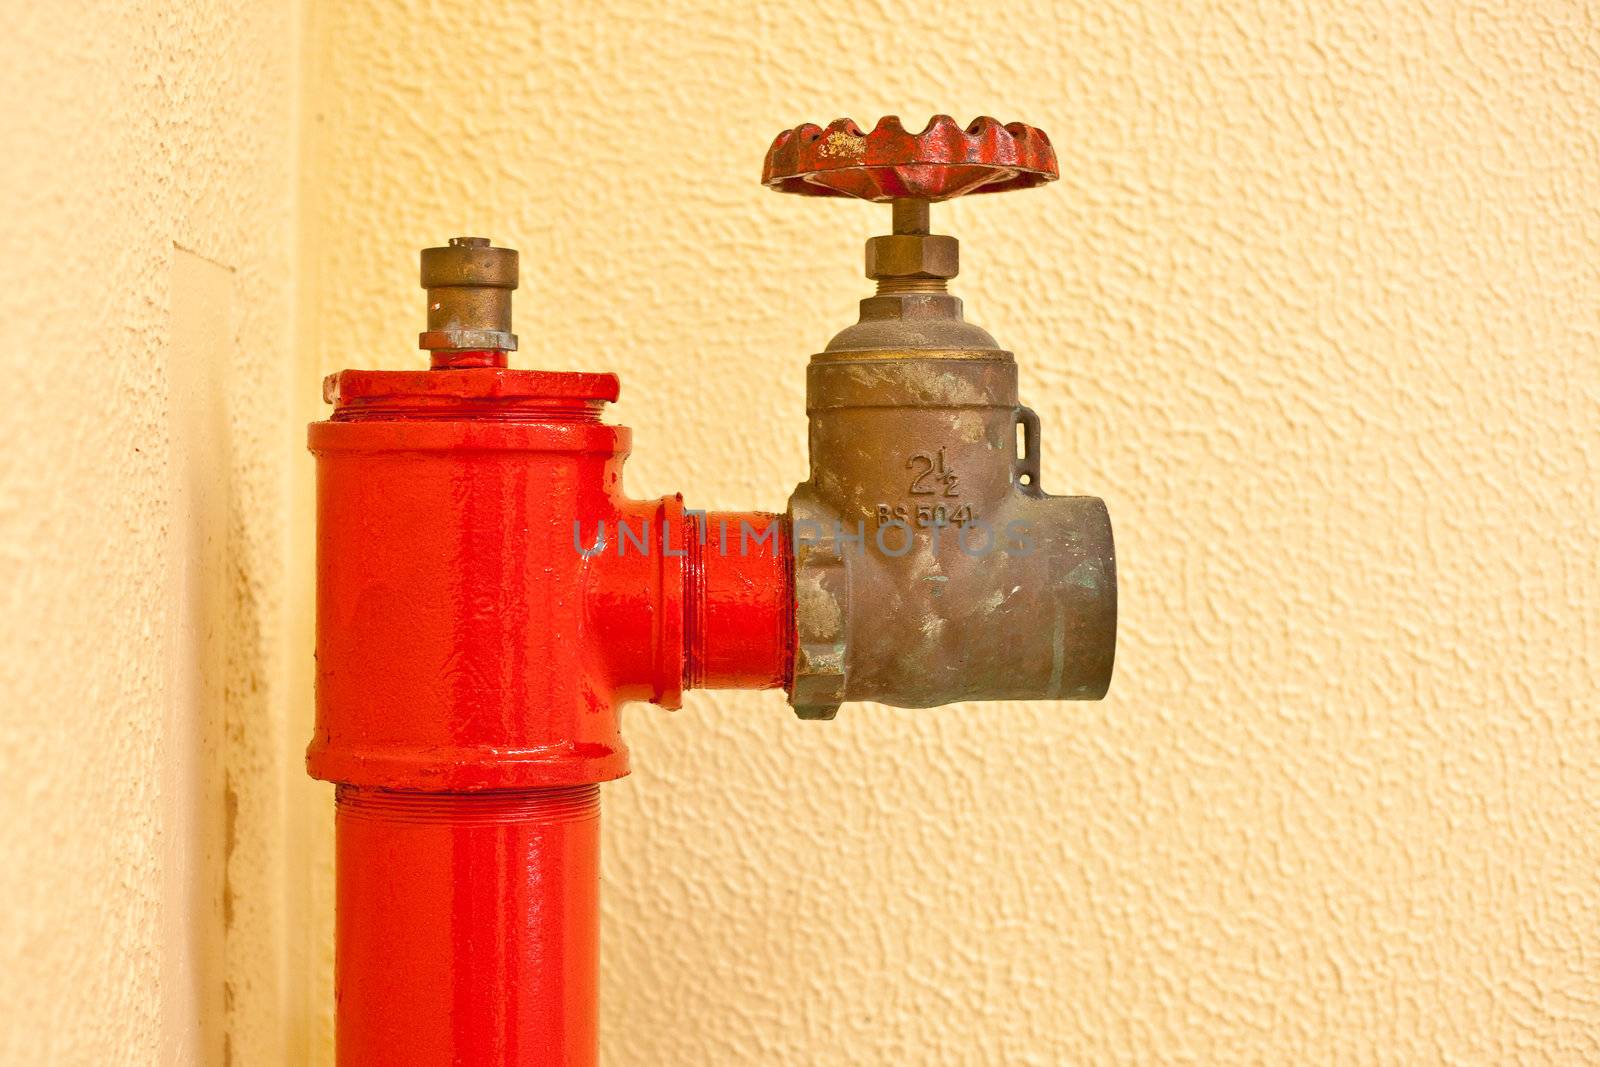 Red fire hydrant against a yellow wall